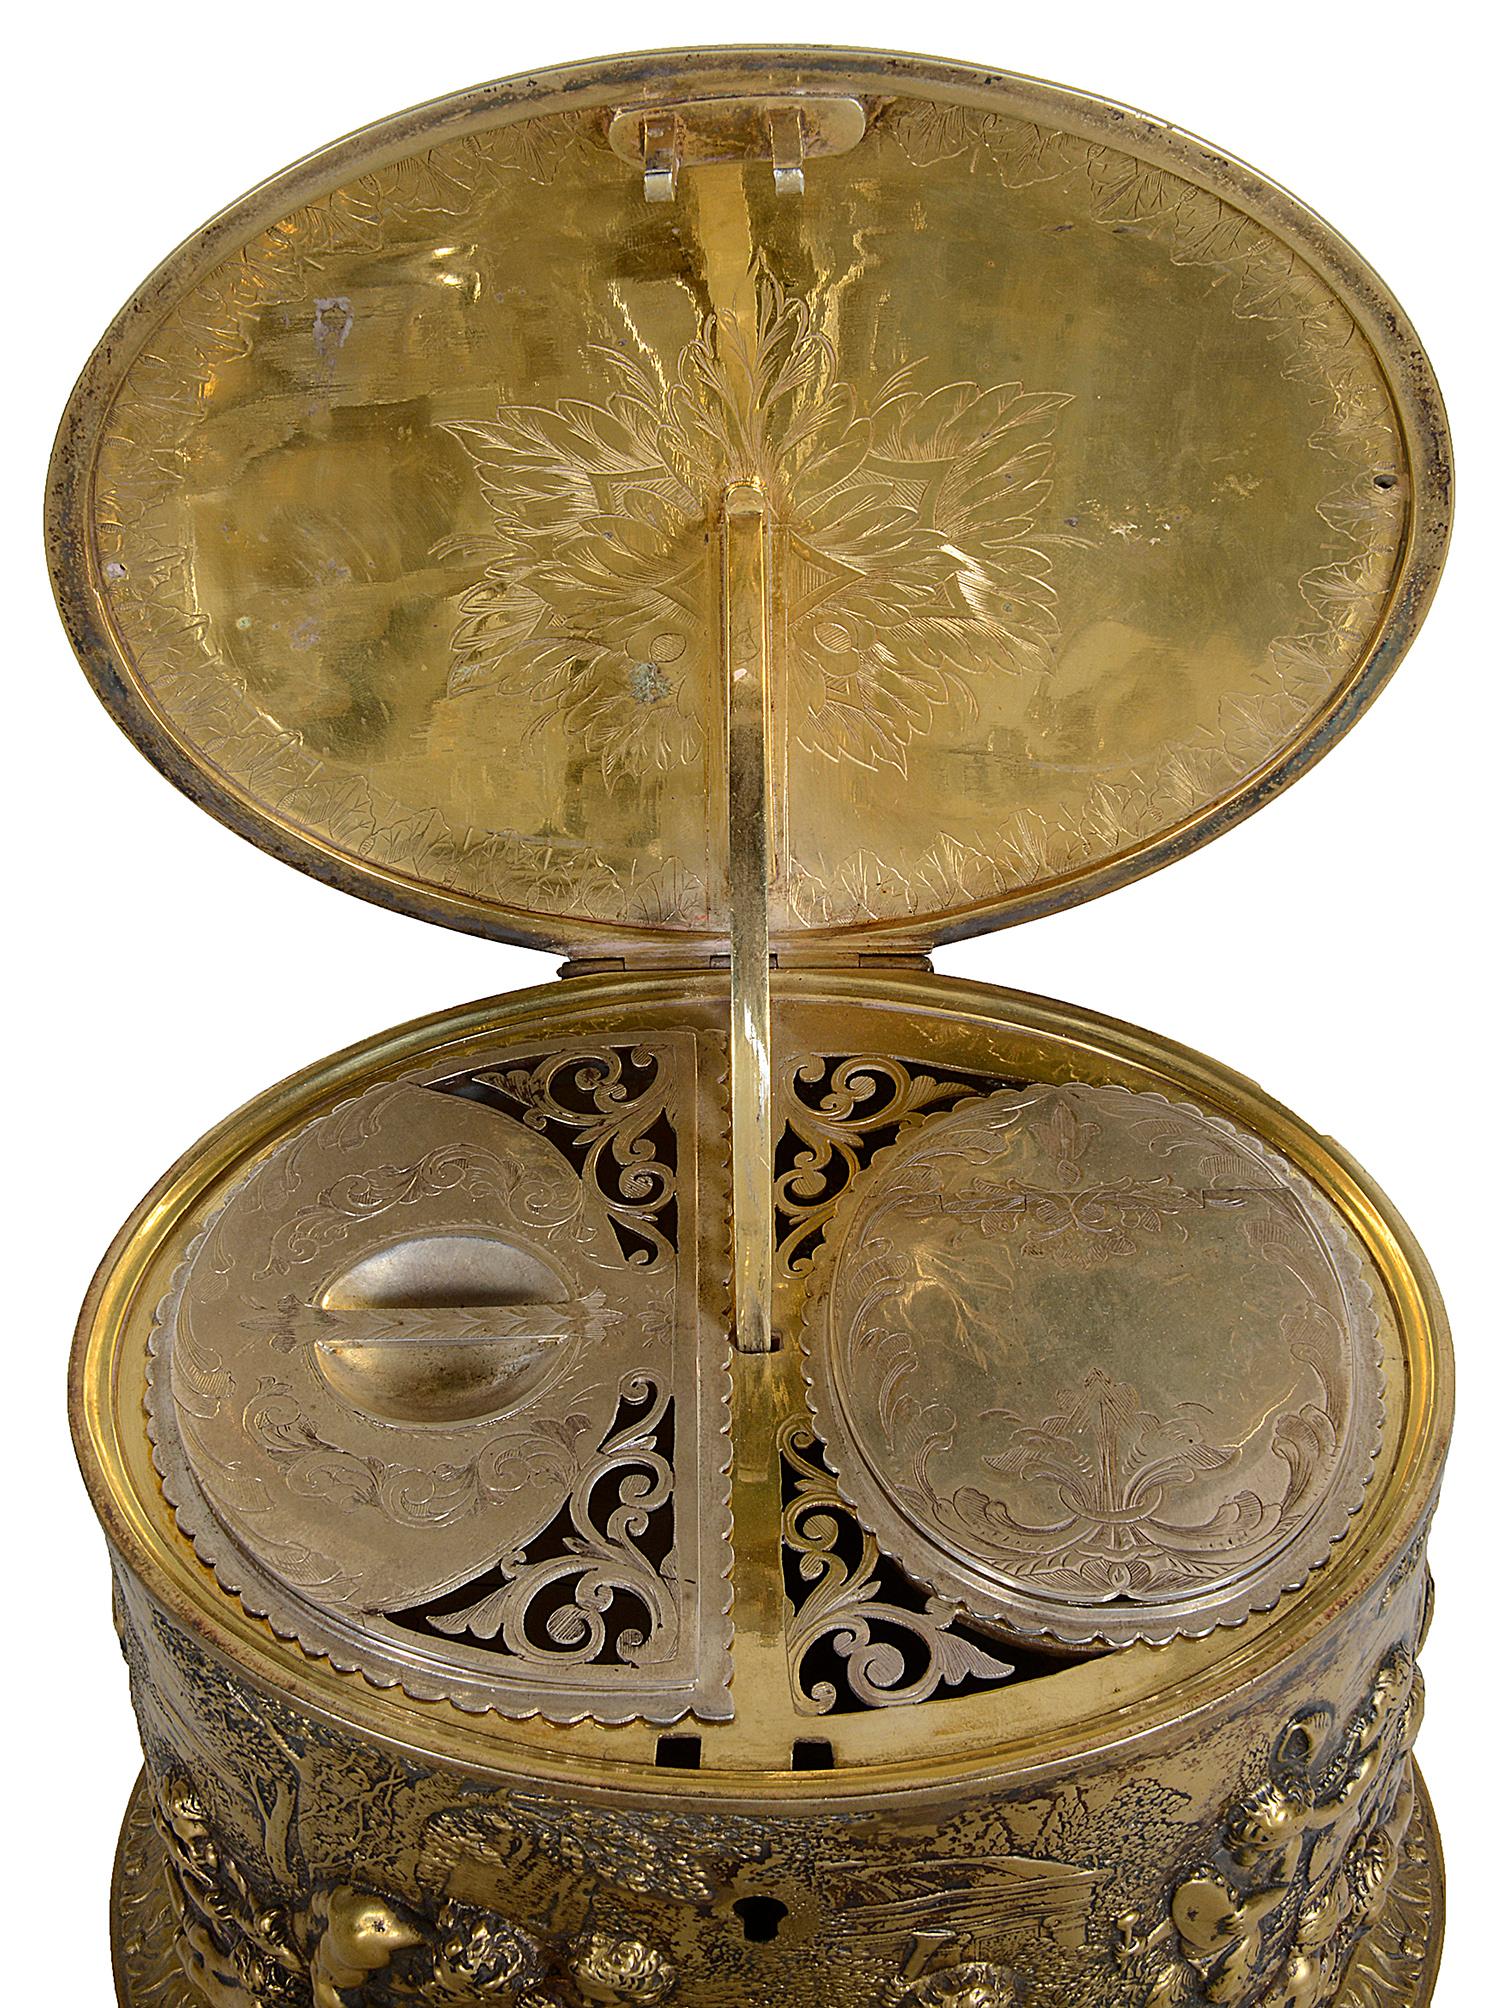 Classical 19th Century Gilded Ormolu Embossed Tea Caddy For Sale 3